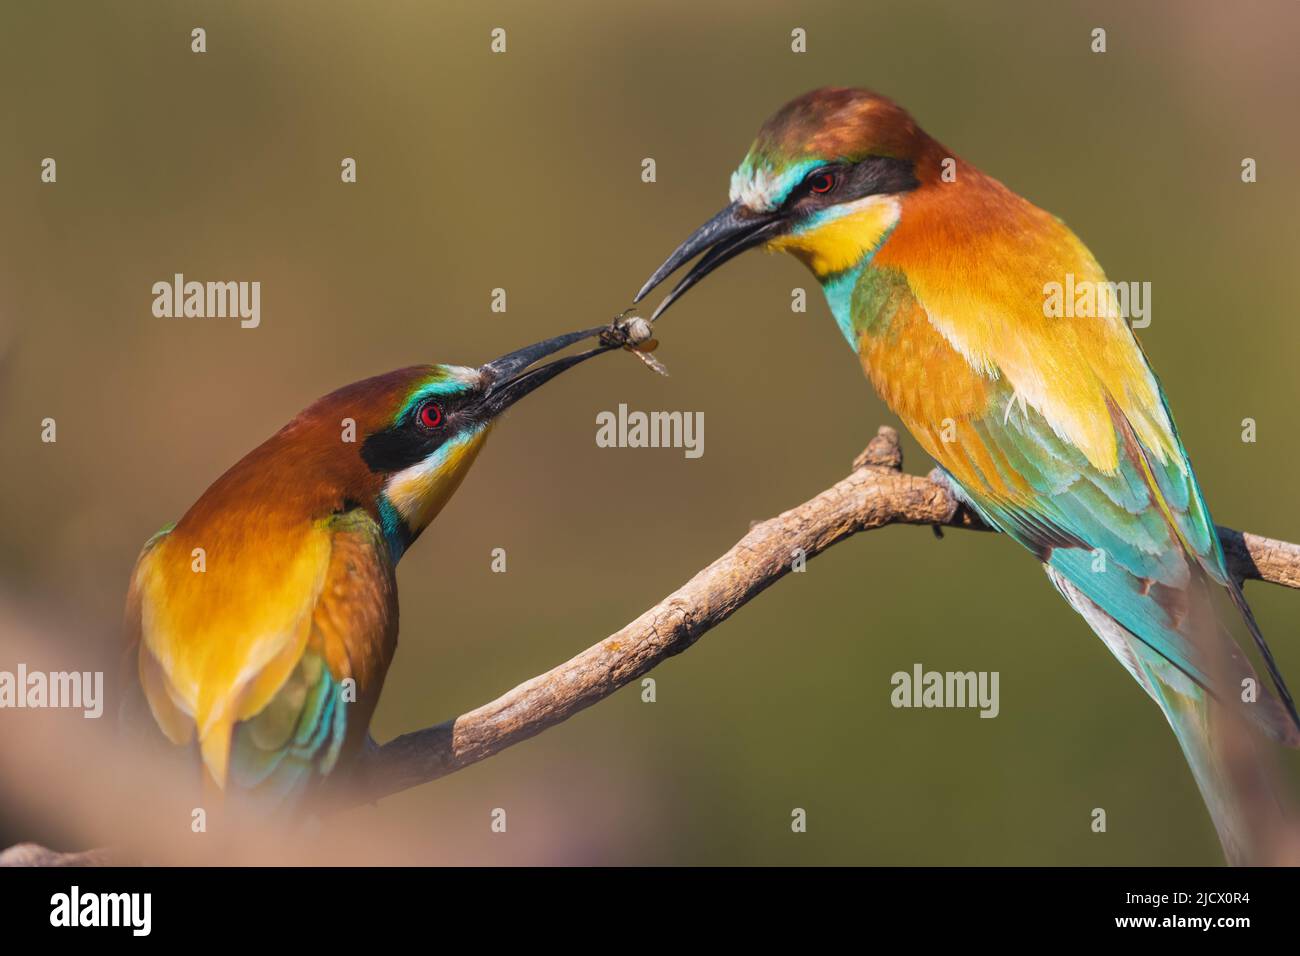 courtship of colorful birds of paradise Stock Photo